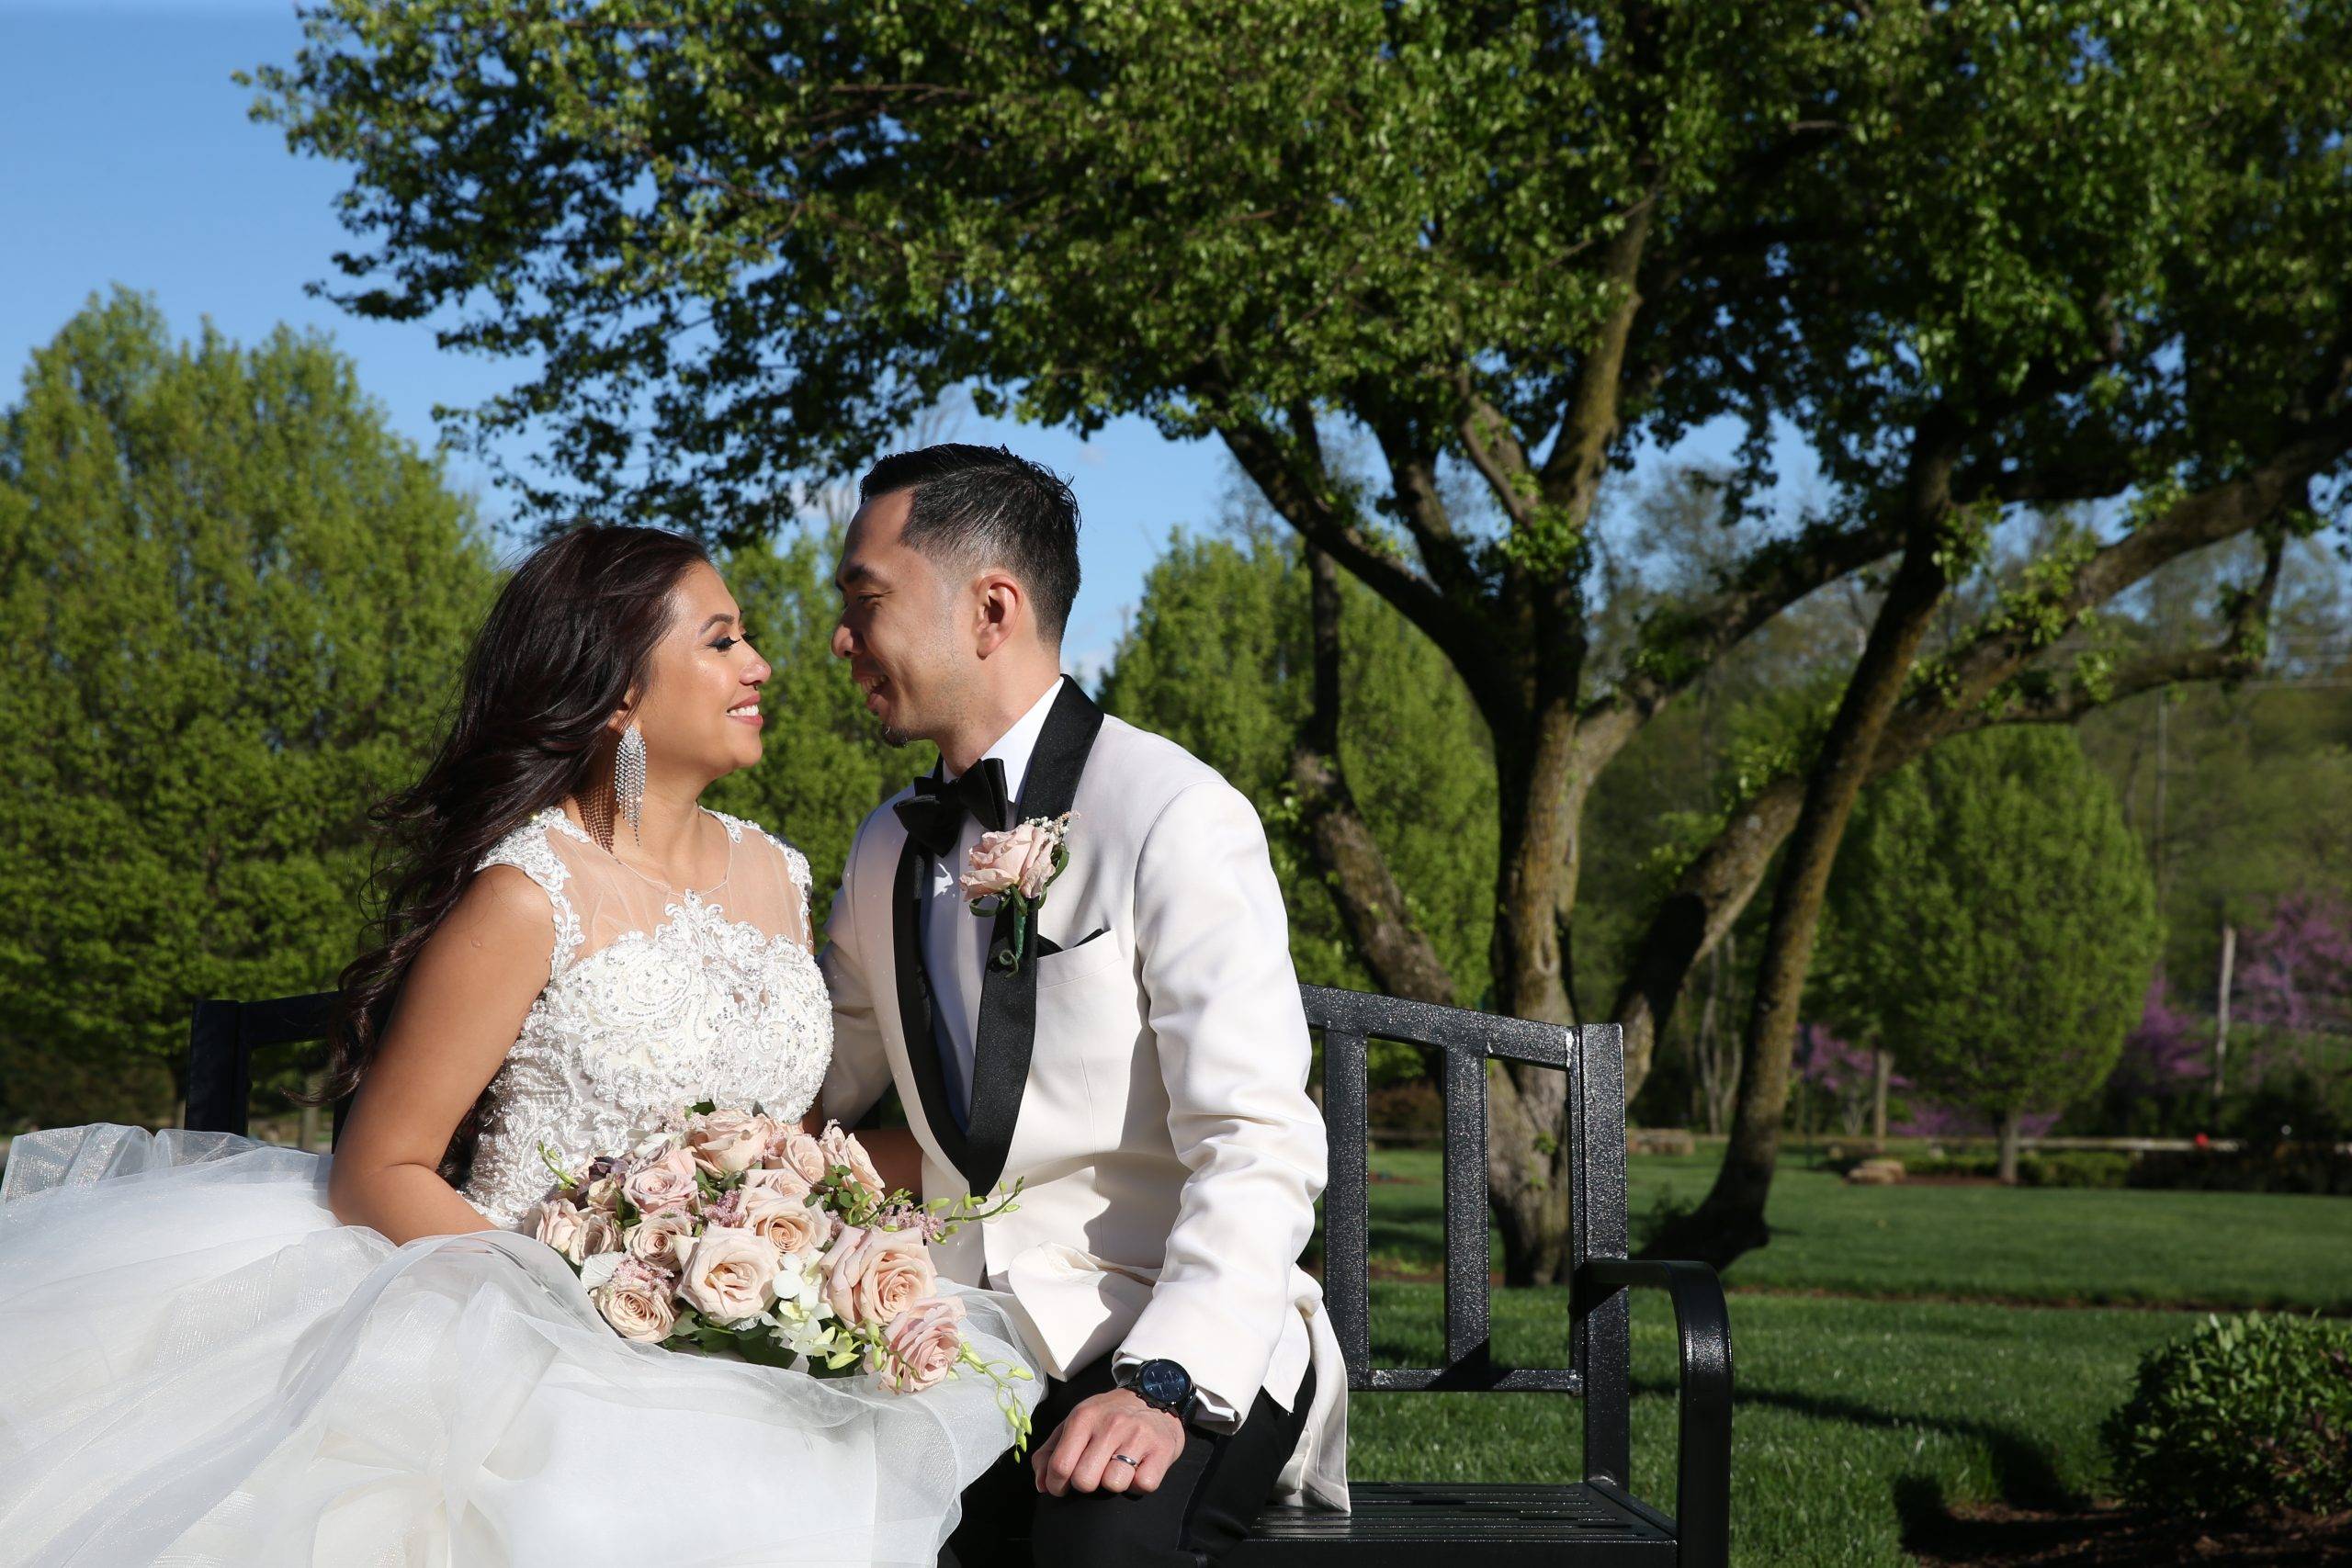 A bride and groom sitting on a bench in a park.